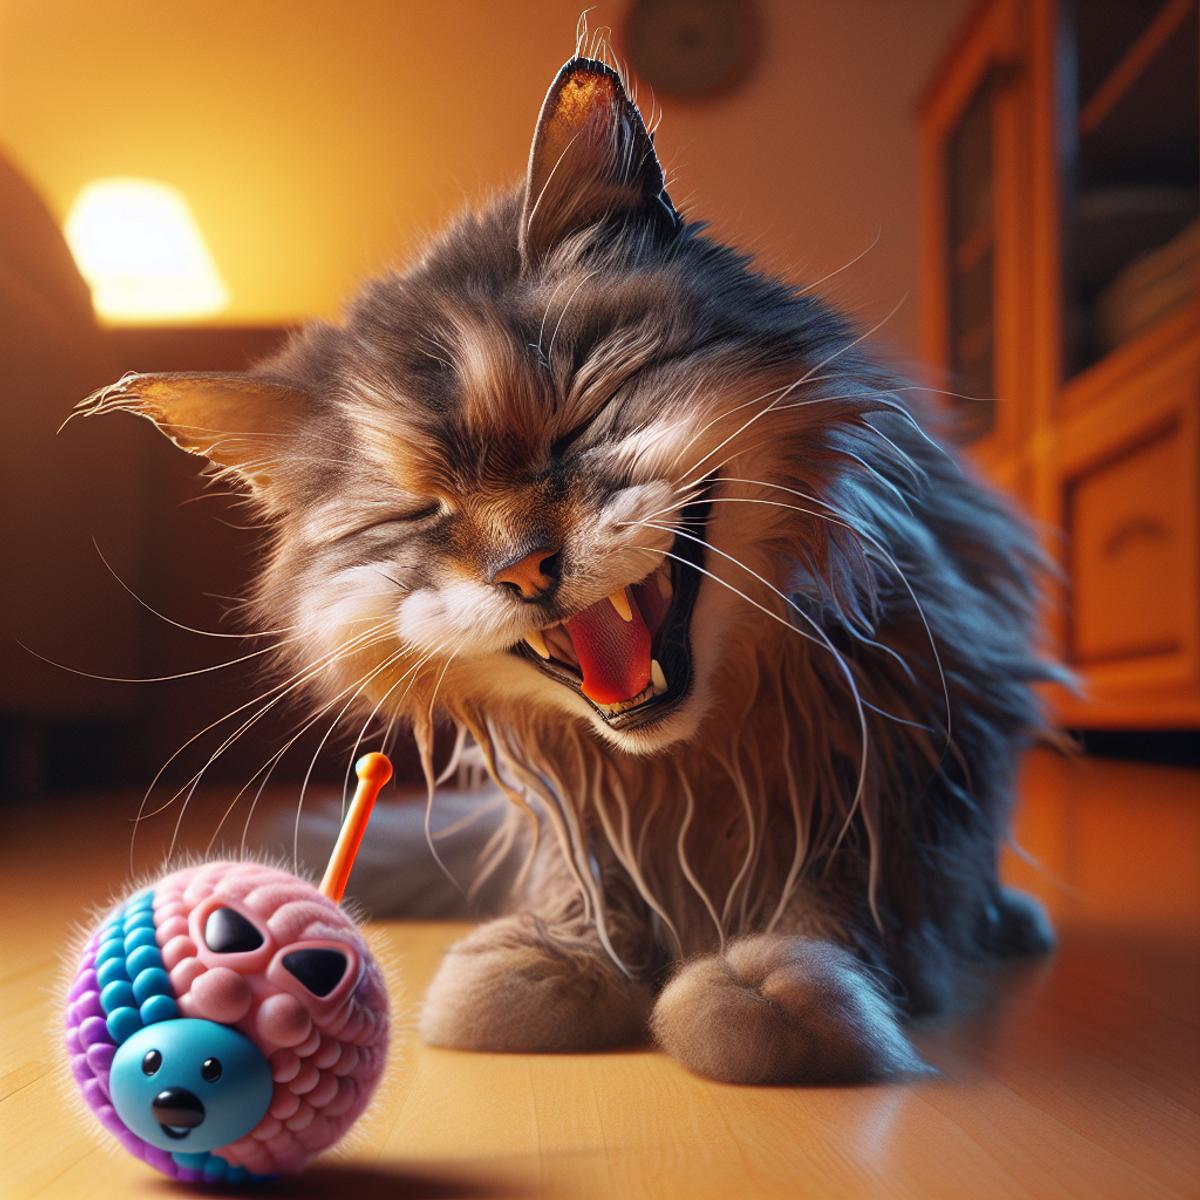 An elderly cat happily playing with a senior-friendly toy.